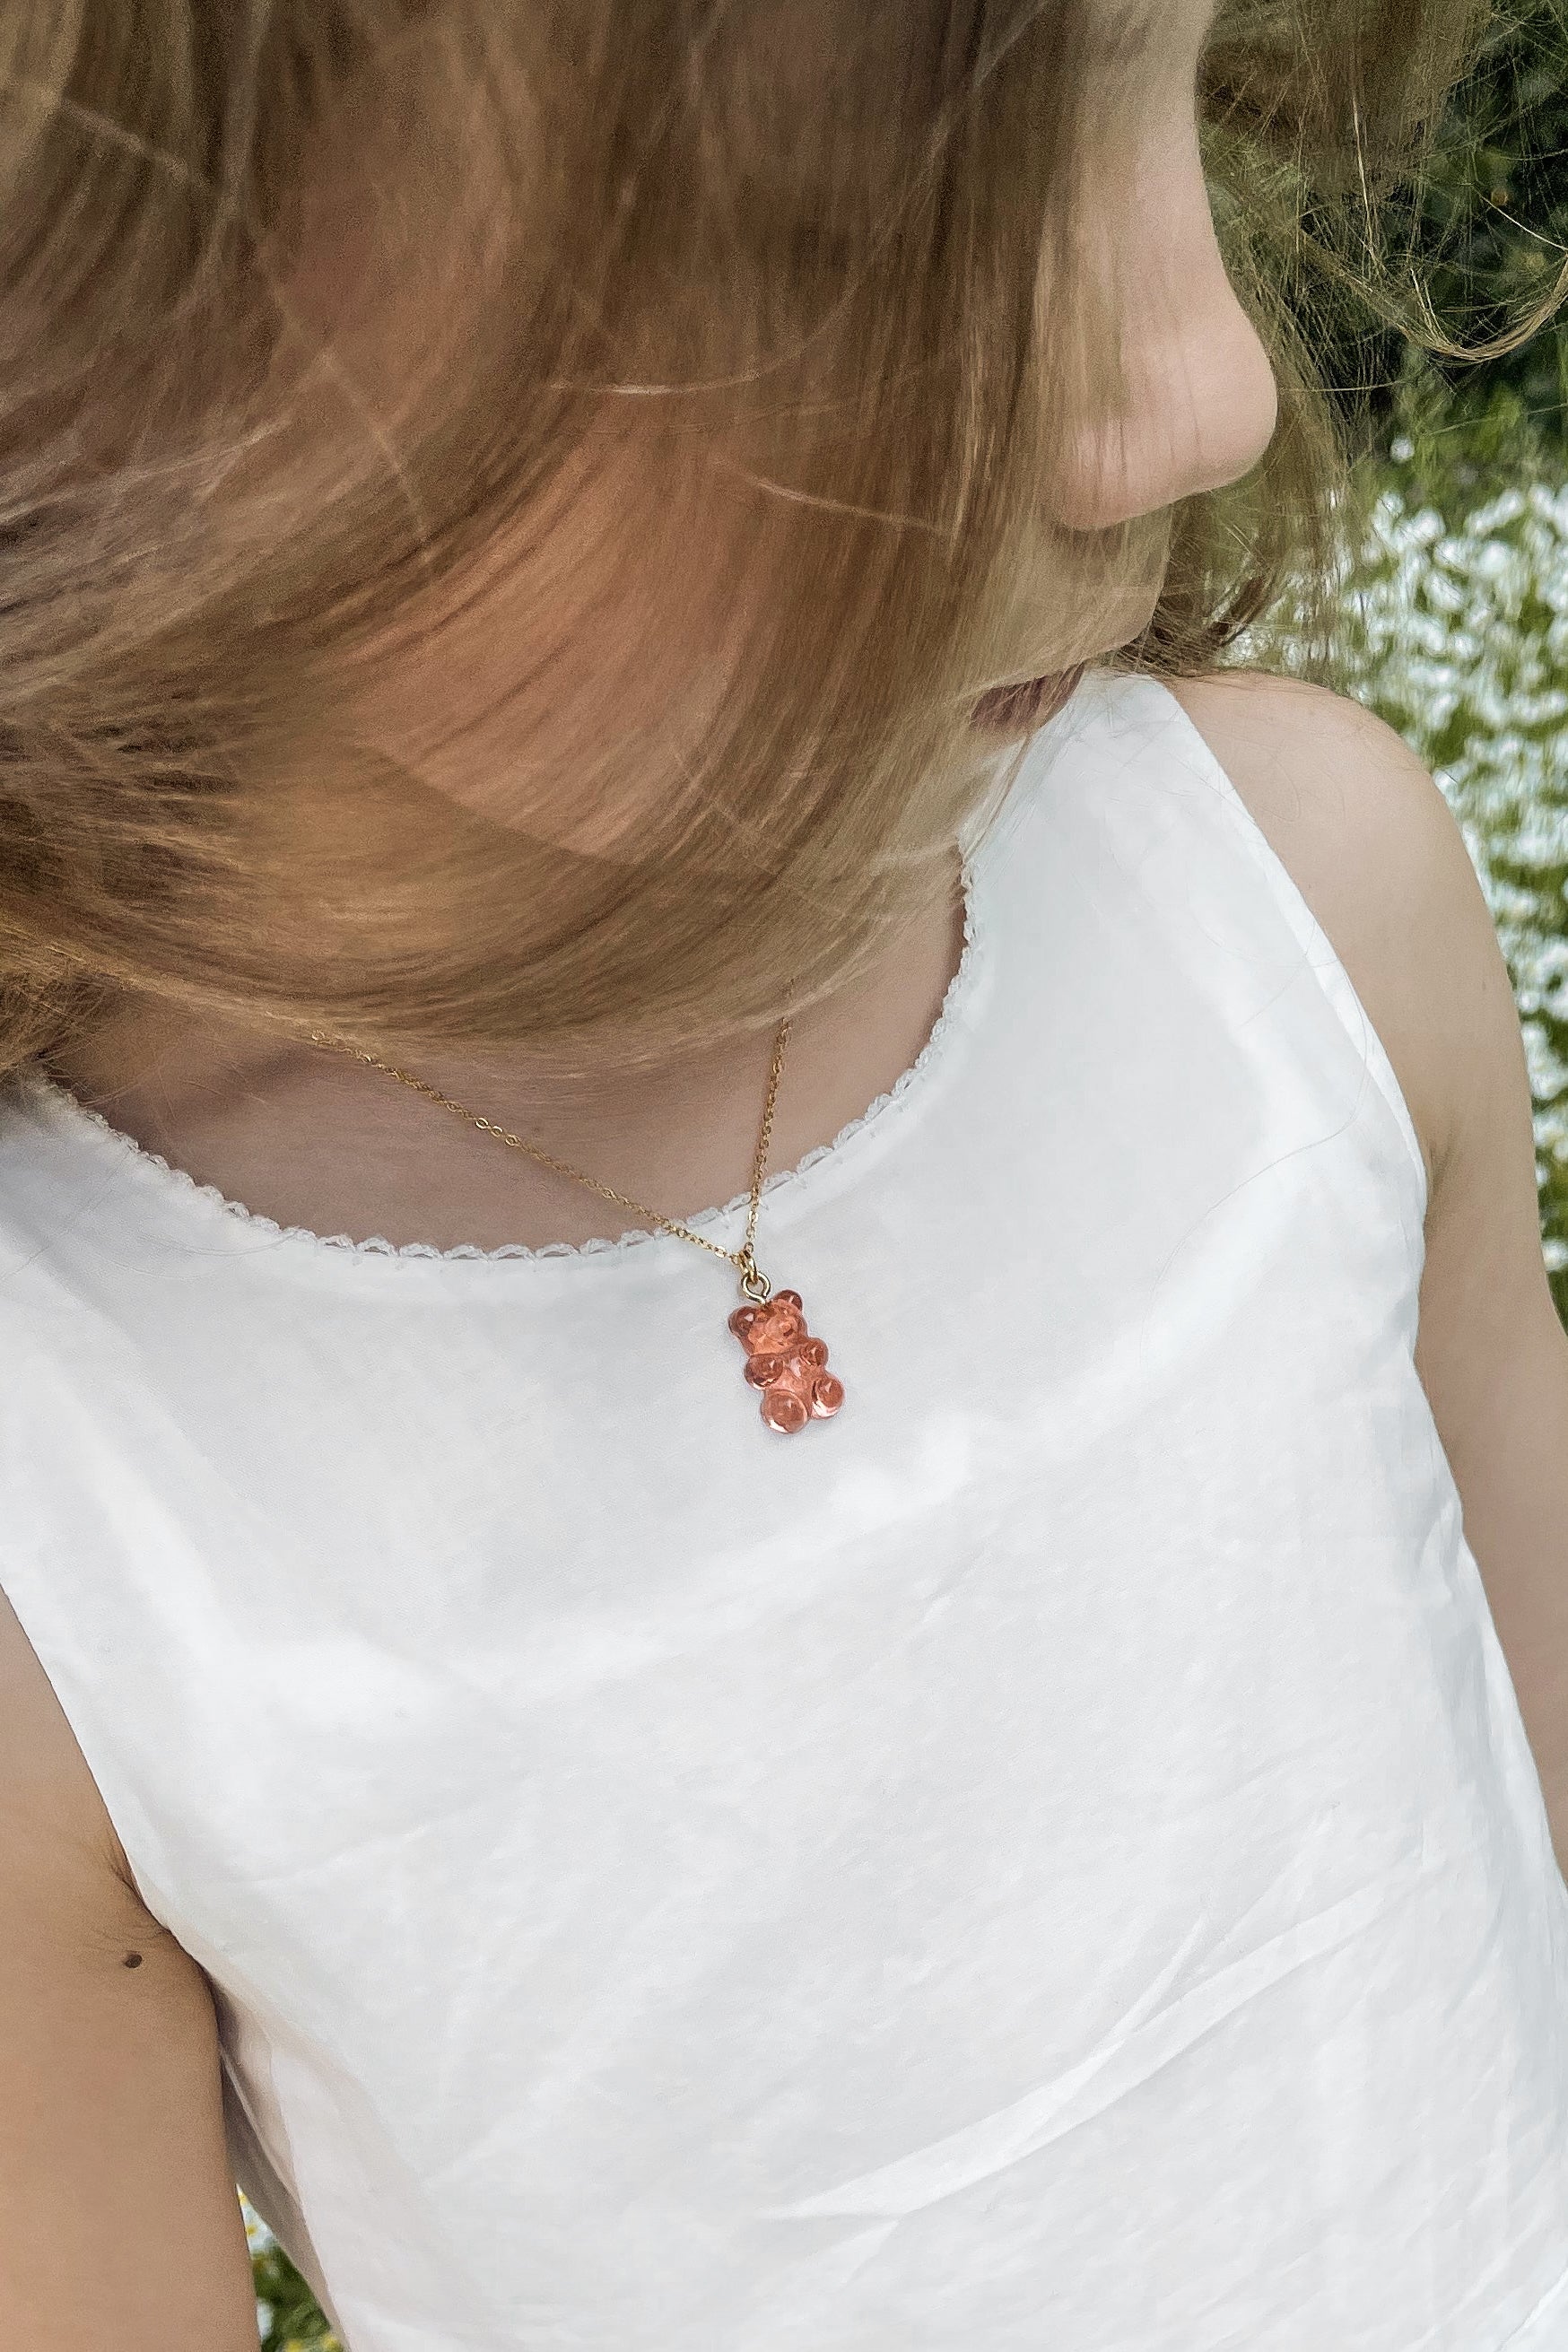 Violet (children) Necklace - Boutique Minimaliste has waterproof, durable, elegant and vintage inspired jewelry